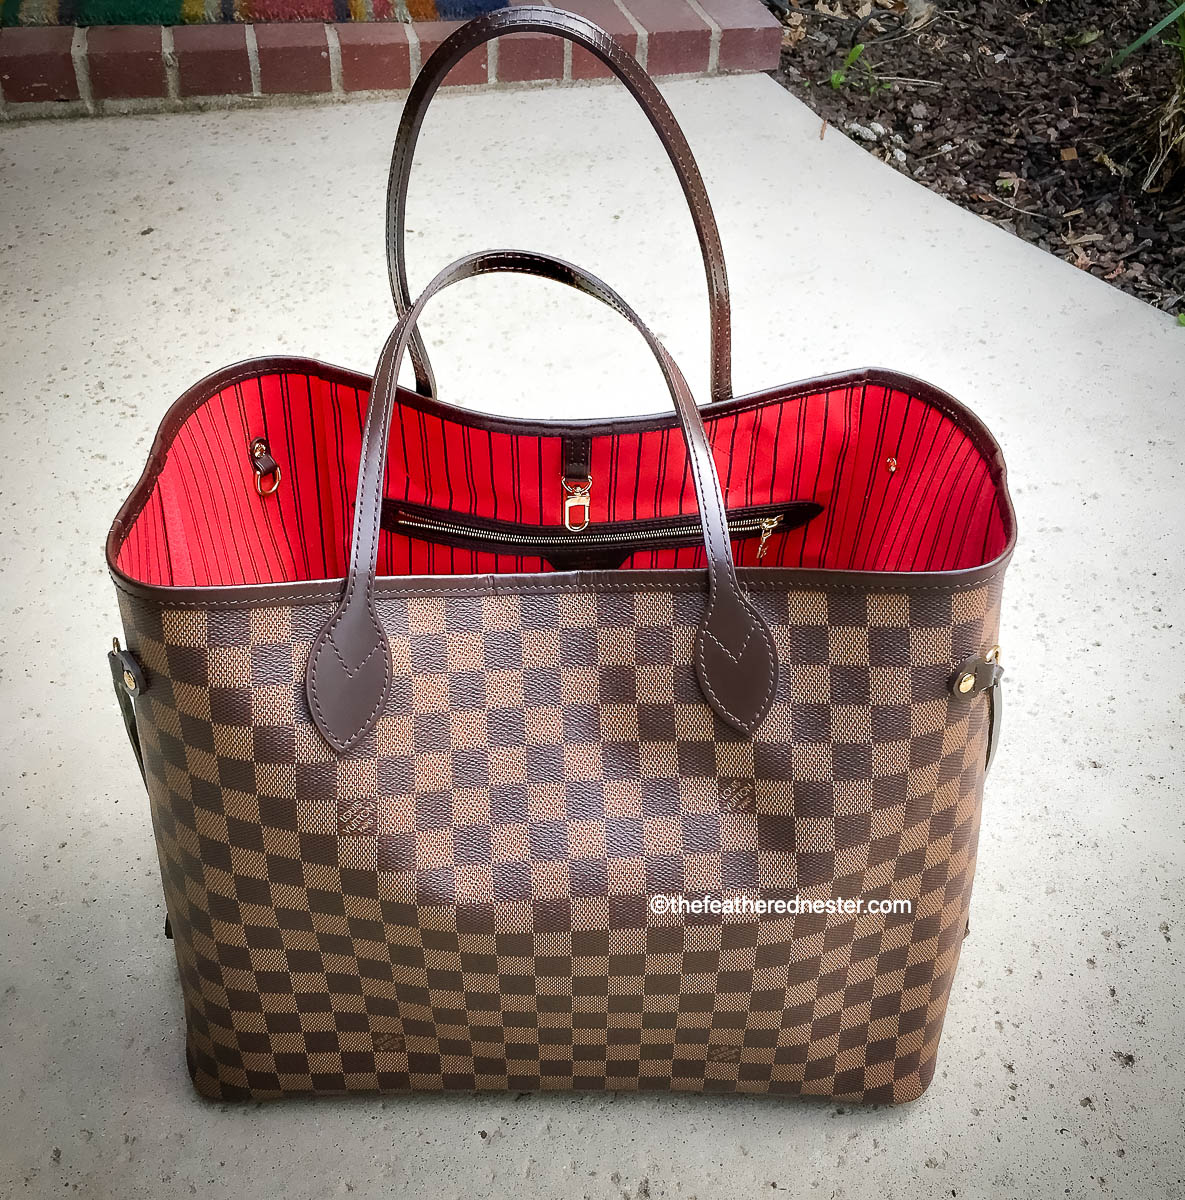 Supplement abolish Disappointment Louis Vuitton Neverfull - A full review on this timeless tote + photos!